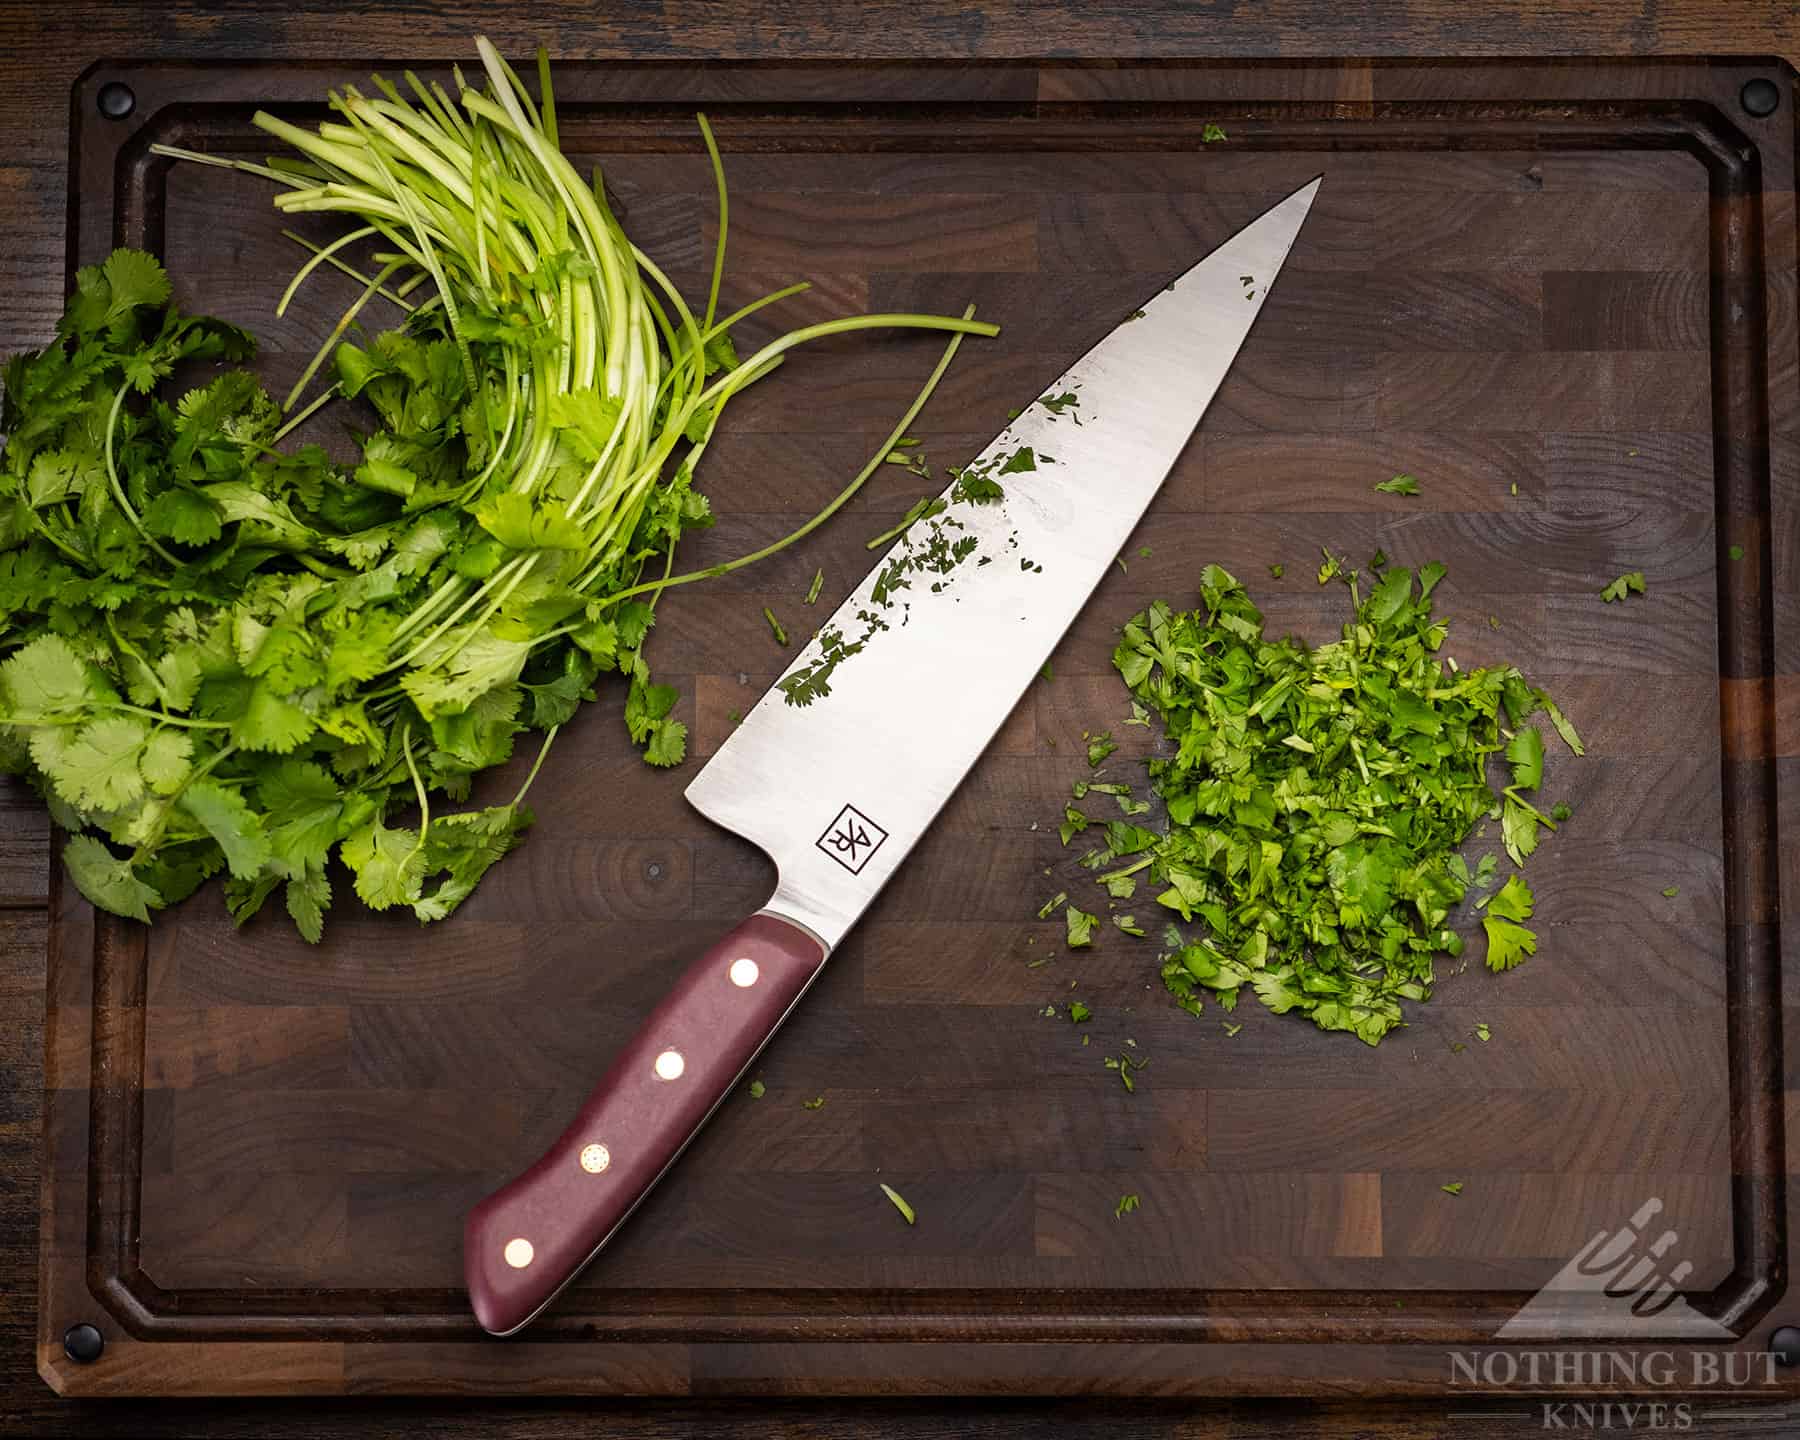 The Artisan Rvere chef knife has excellent edge retention due to the hardness and durability of its Elmax steel blade. 